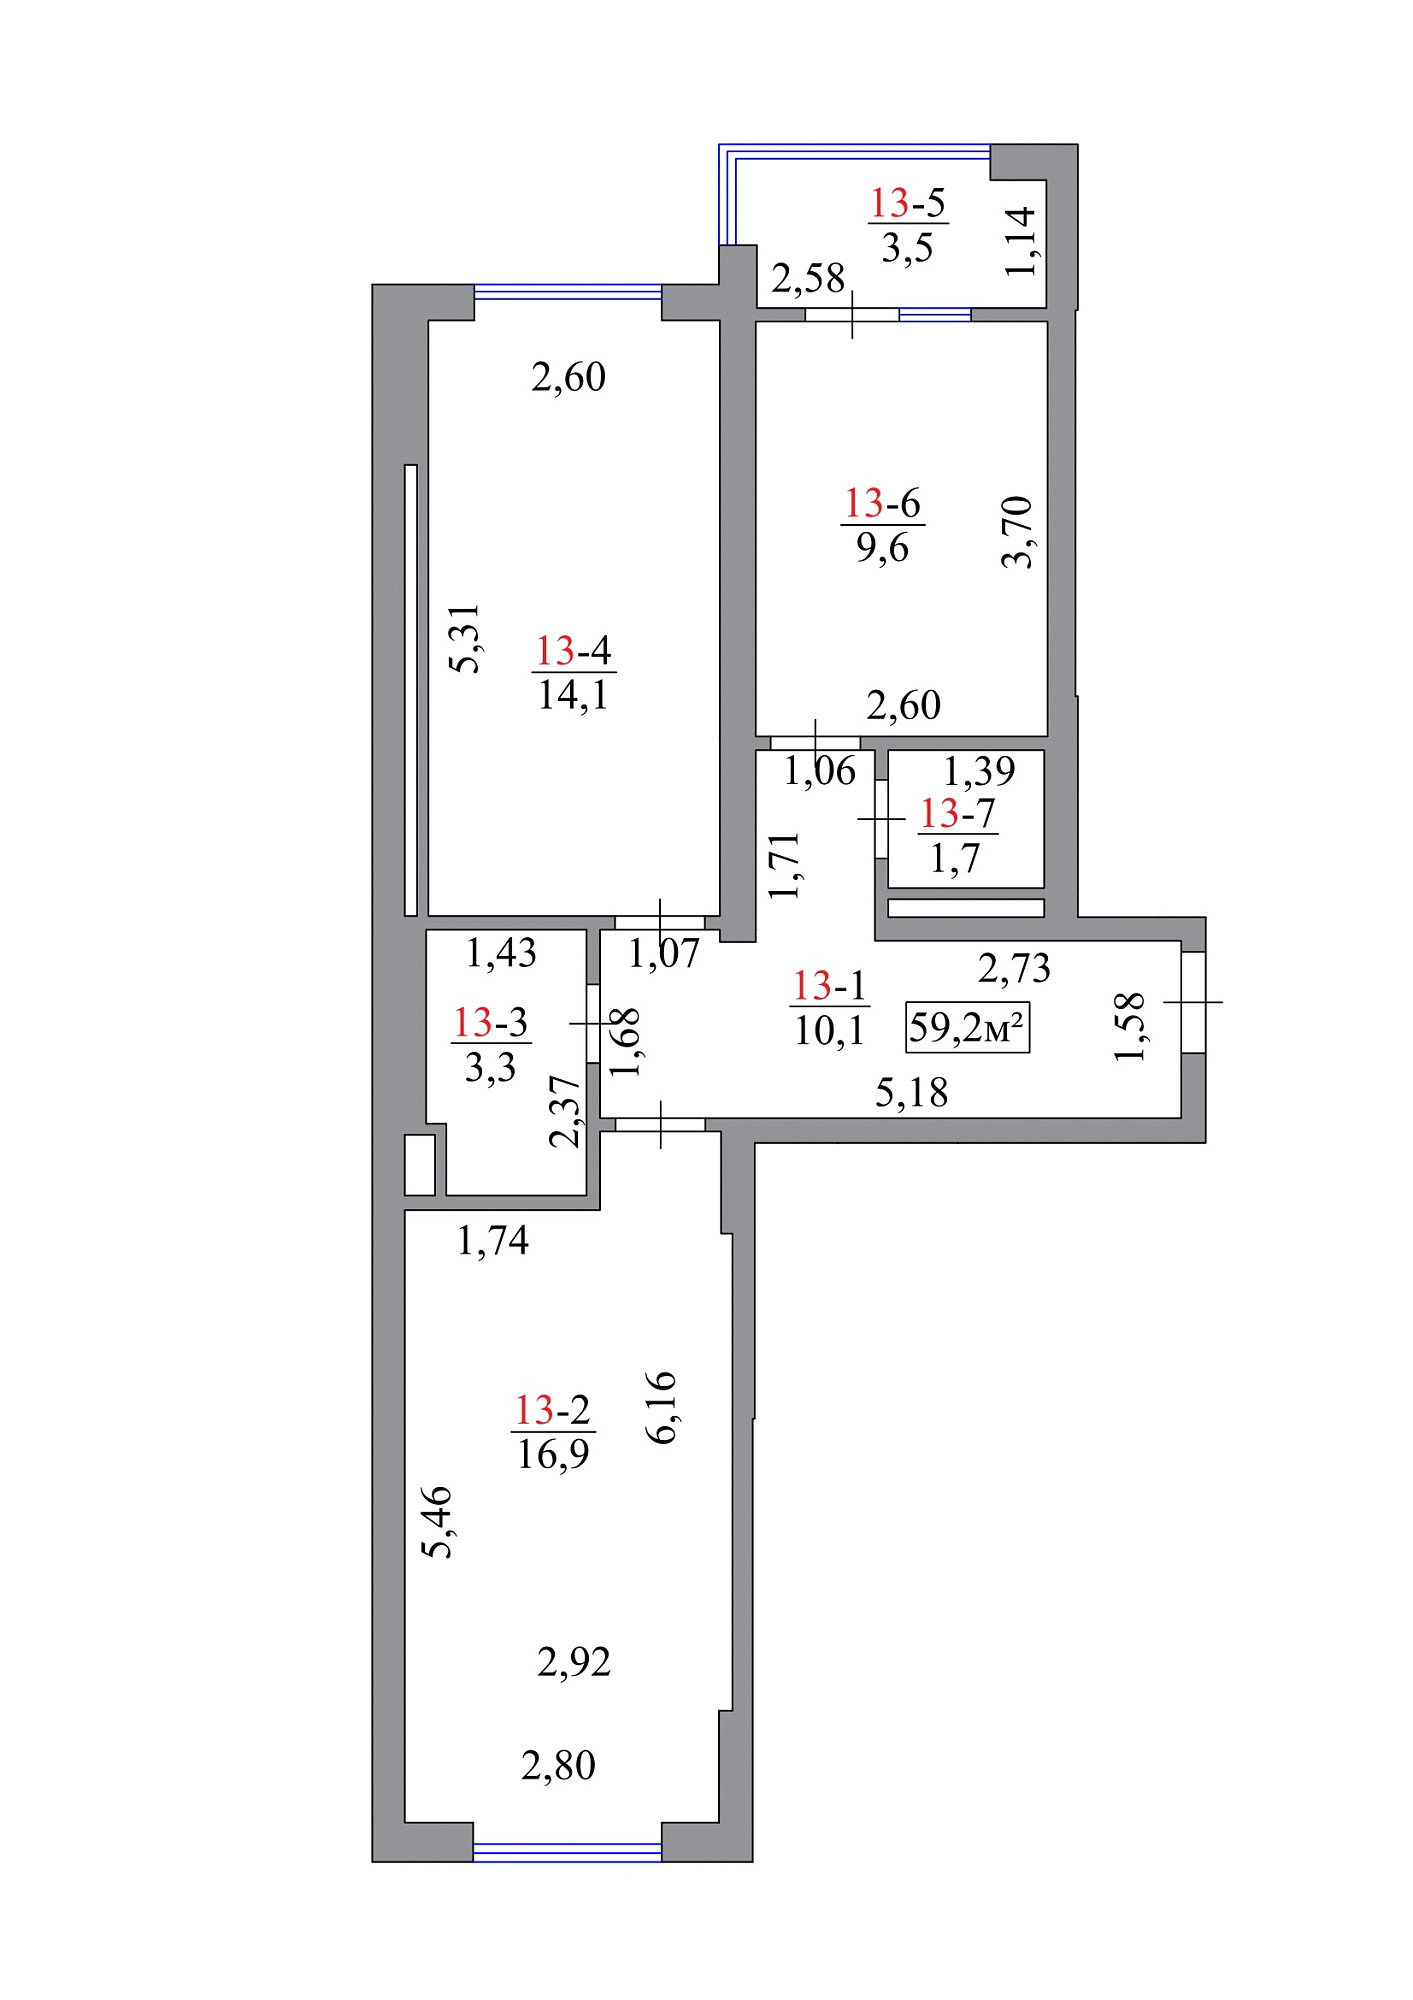 Planning 2-rm flats area 59.2m2, AB-07-02/00012.